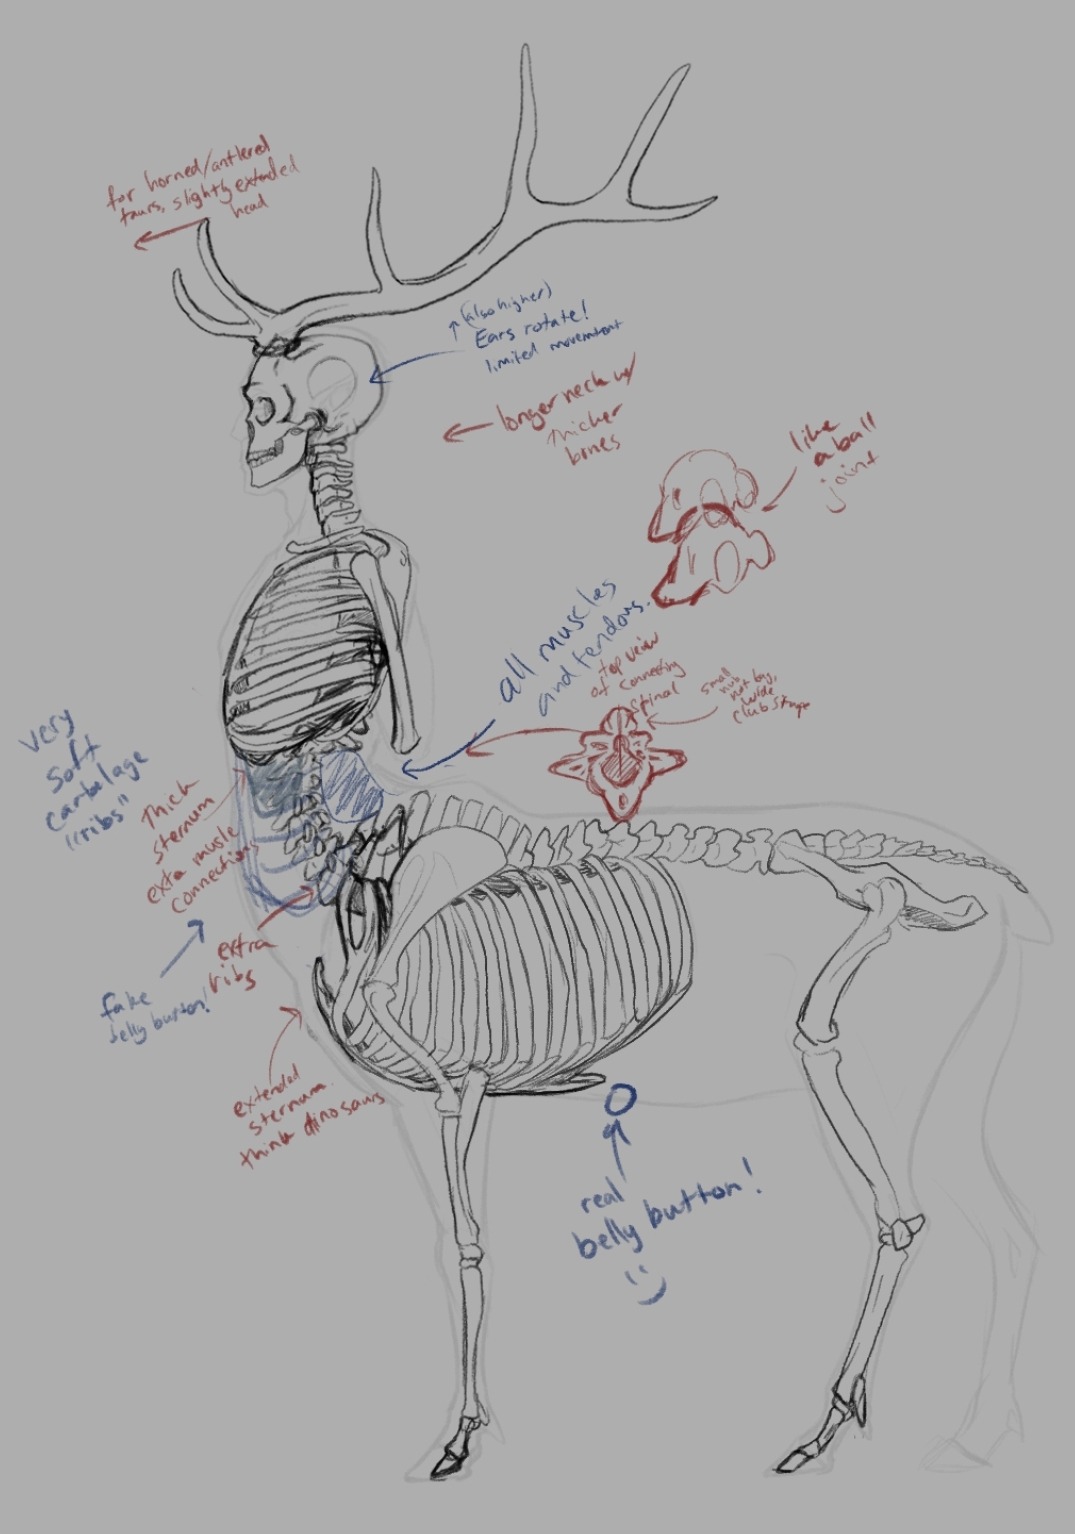 image of an elk centaur skeleton with notes which are discussed below